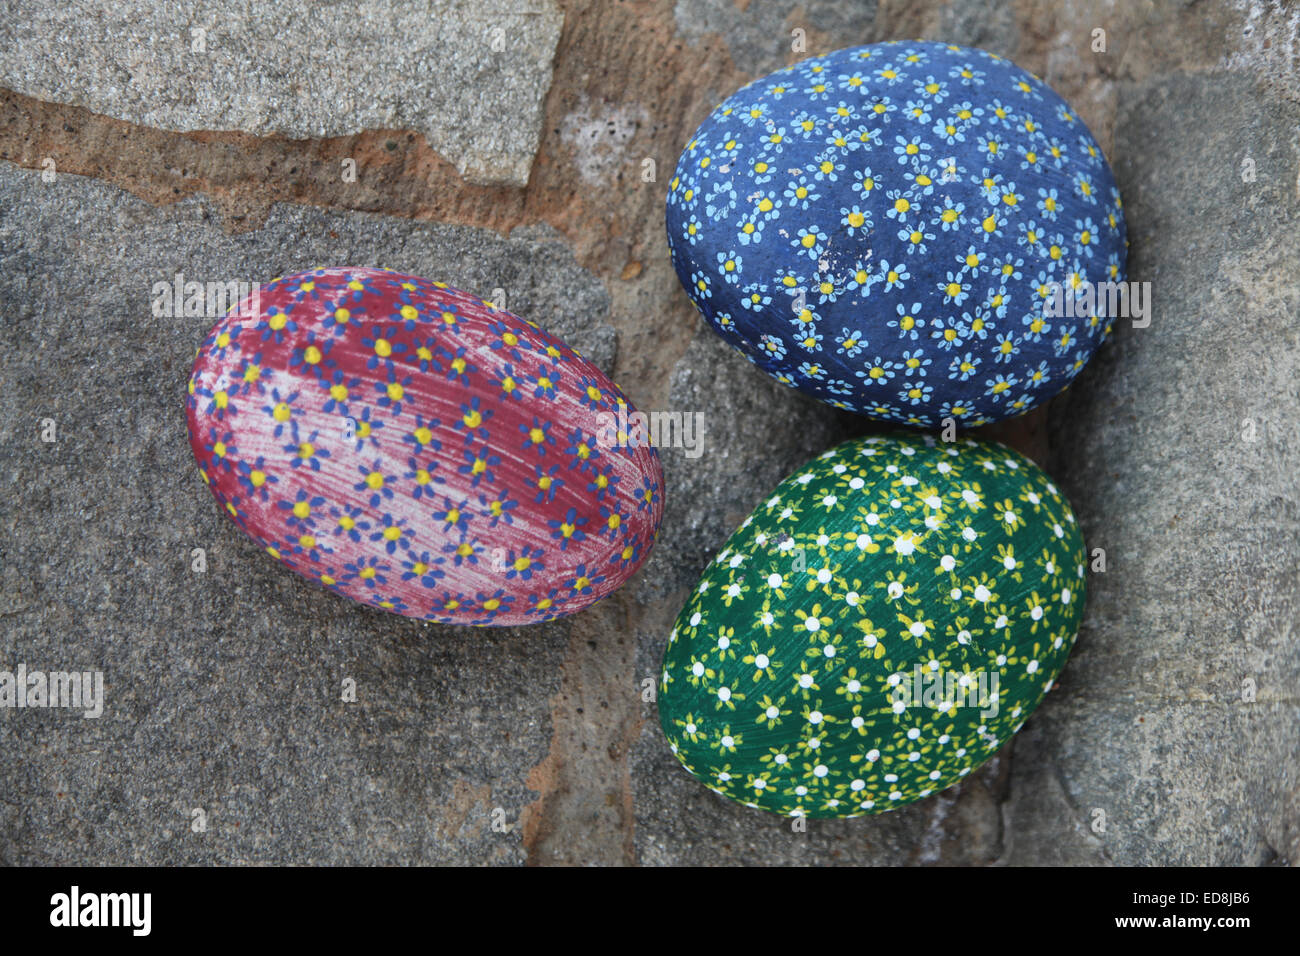 Three brightly coloured stones painted in a striking 'aboriginal' style, red, blue and green with flower motives overall. Stock Photo